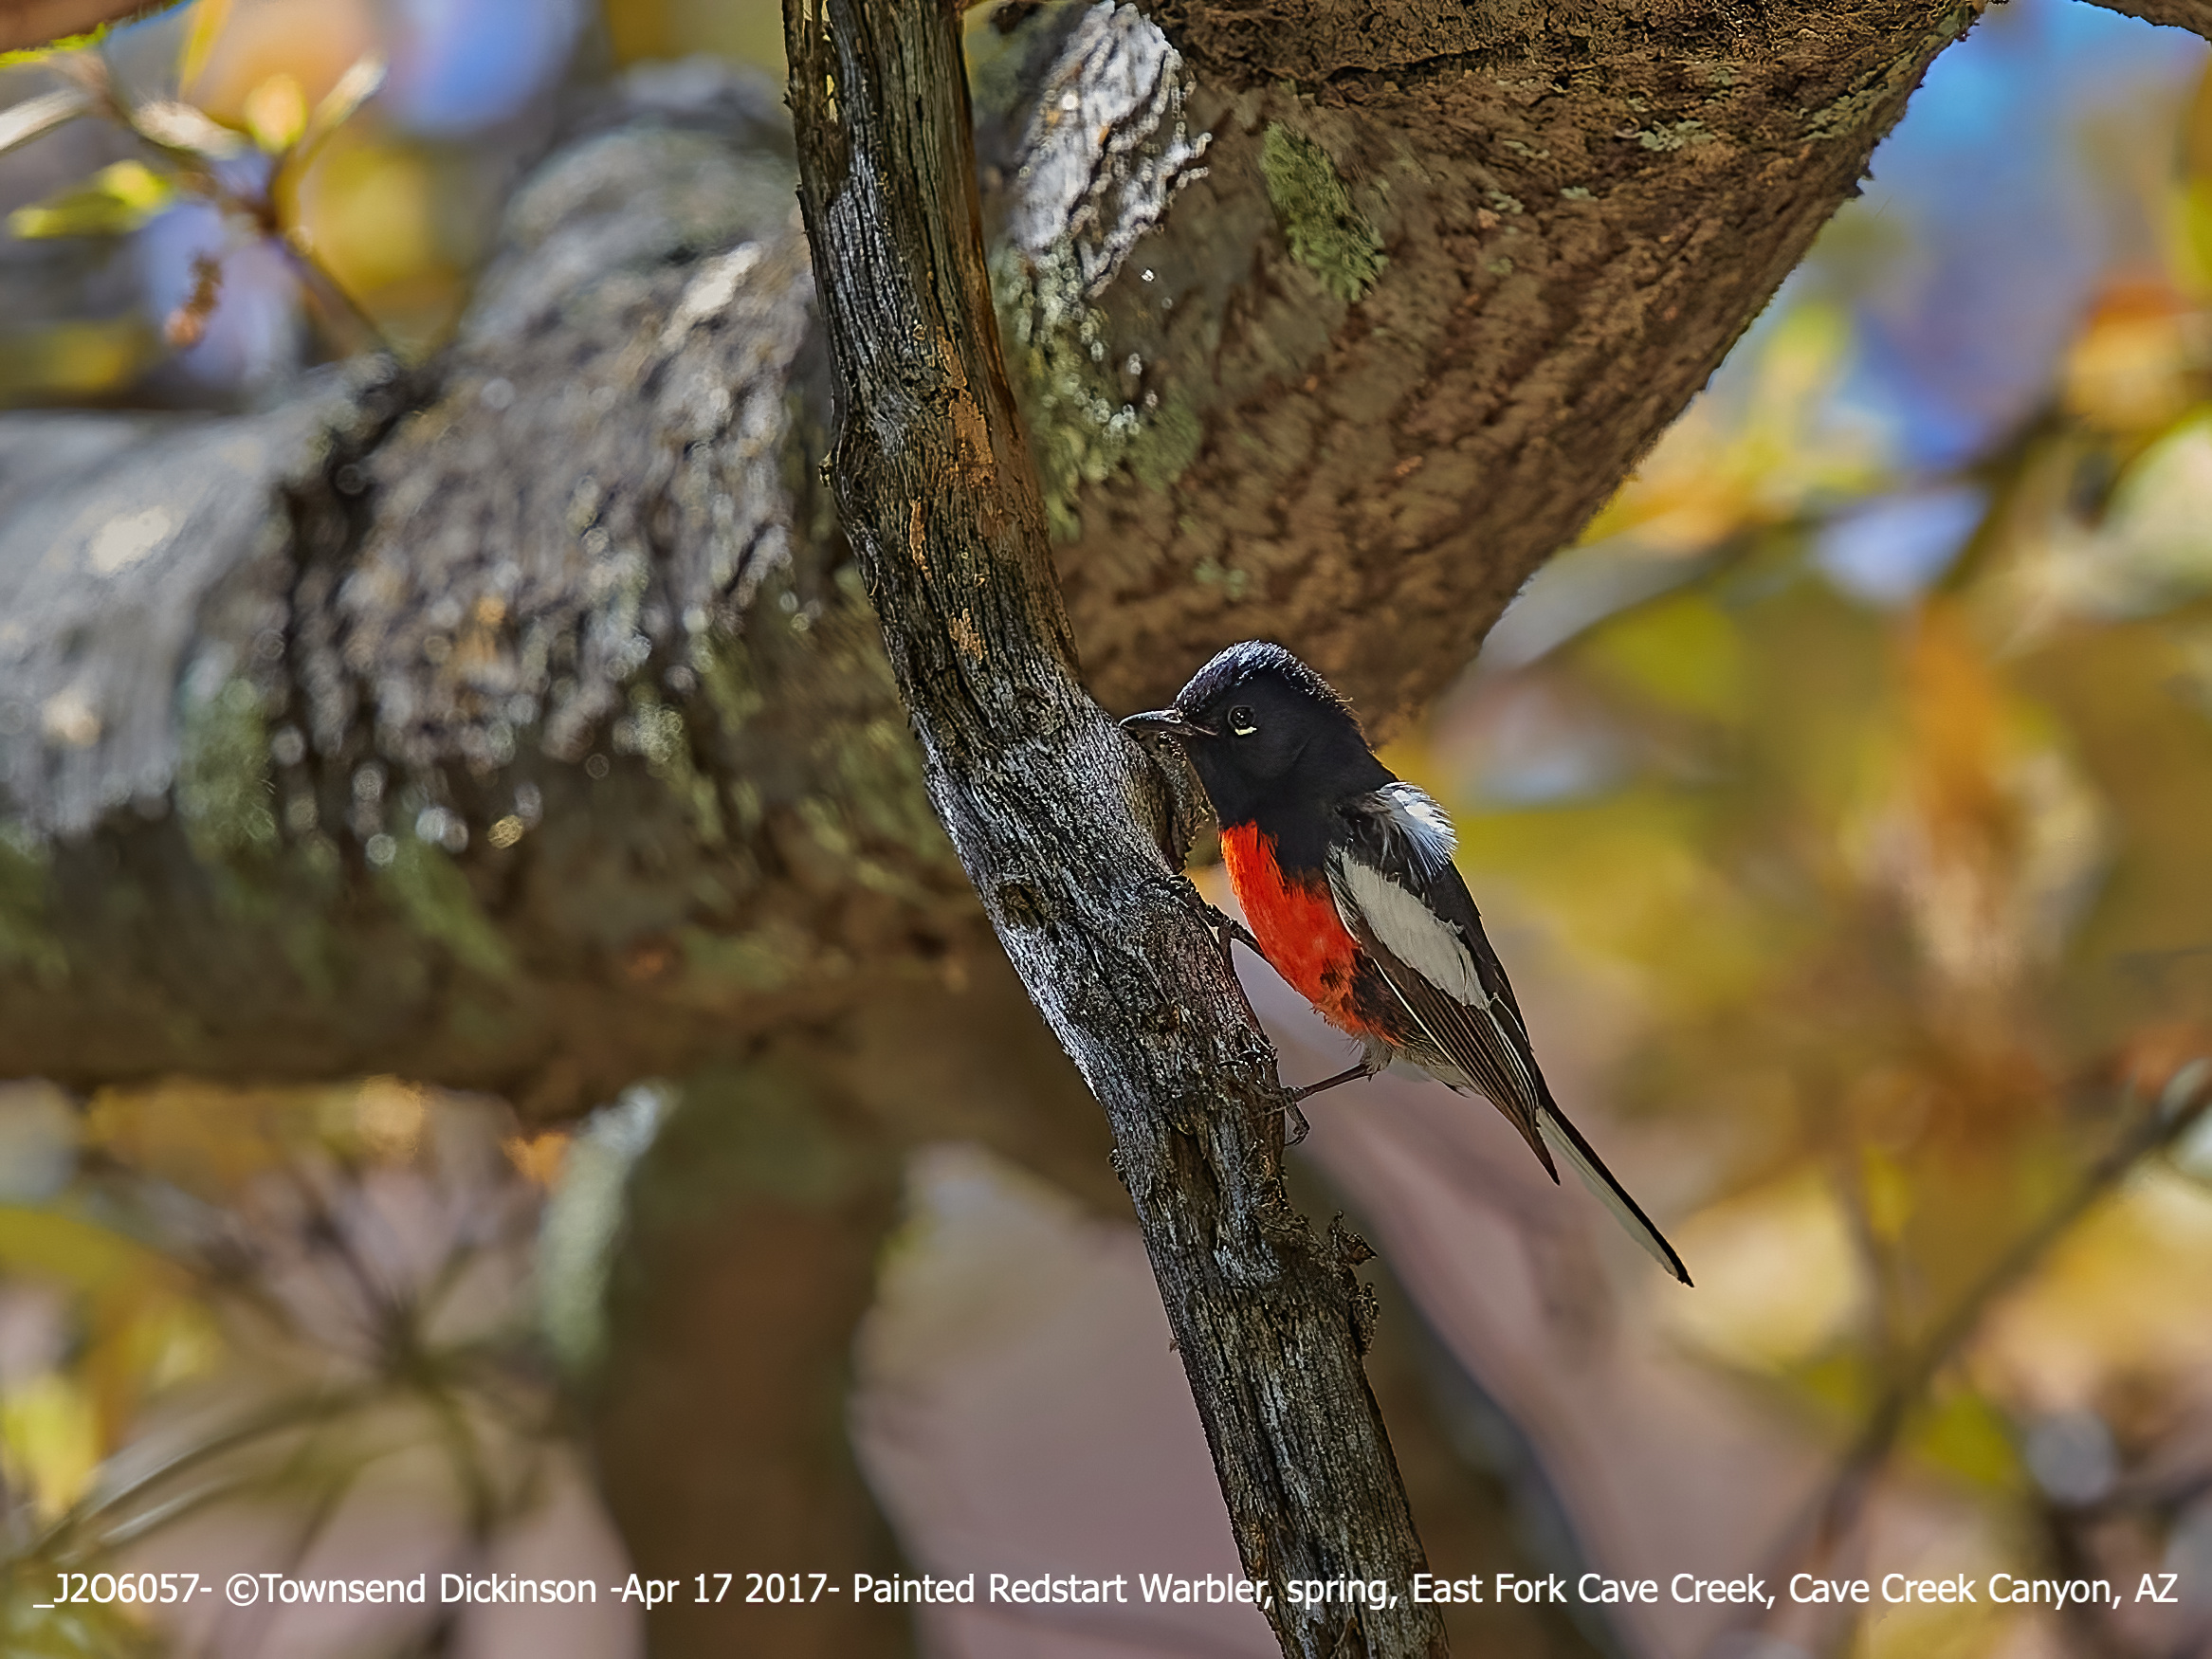 Painted Redstart Warbler, spring, East Fork Cave Creek, Cave Creek Canyon, AZ April 17, 2017. ©Townsend Dickinson Lis#J206057. All Rights Reserved.